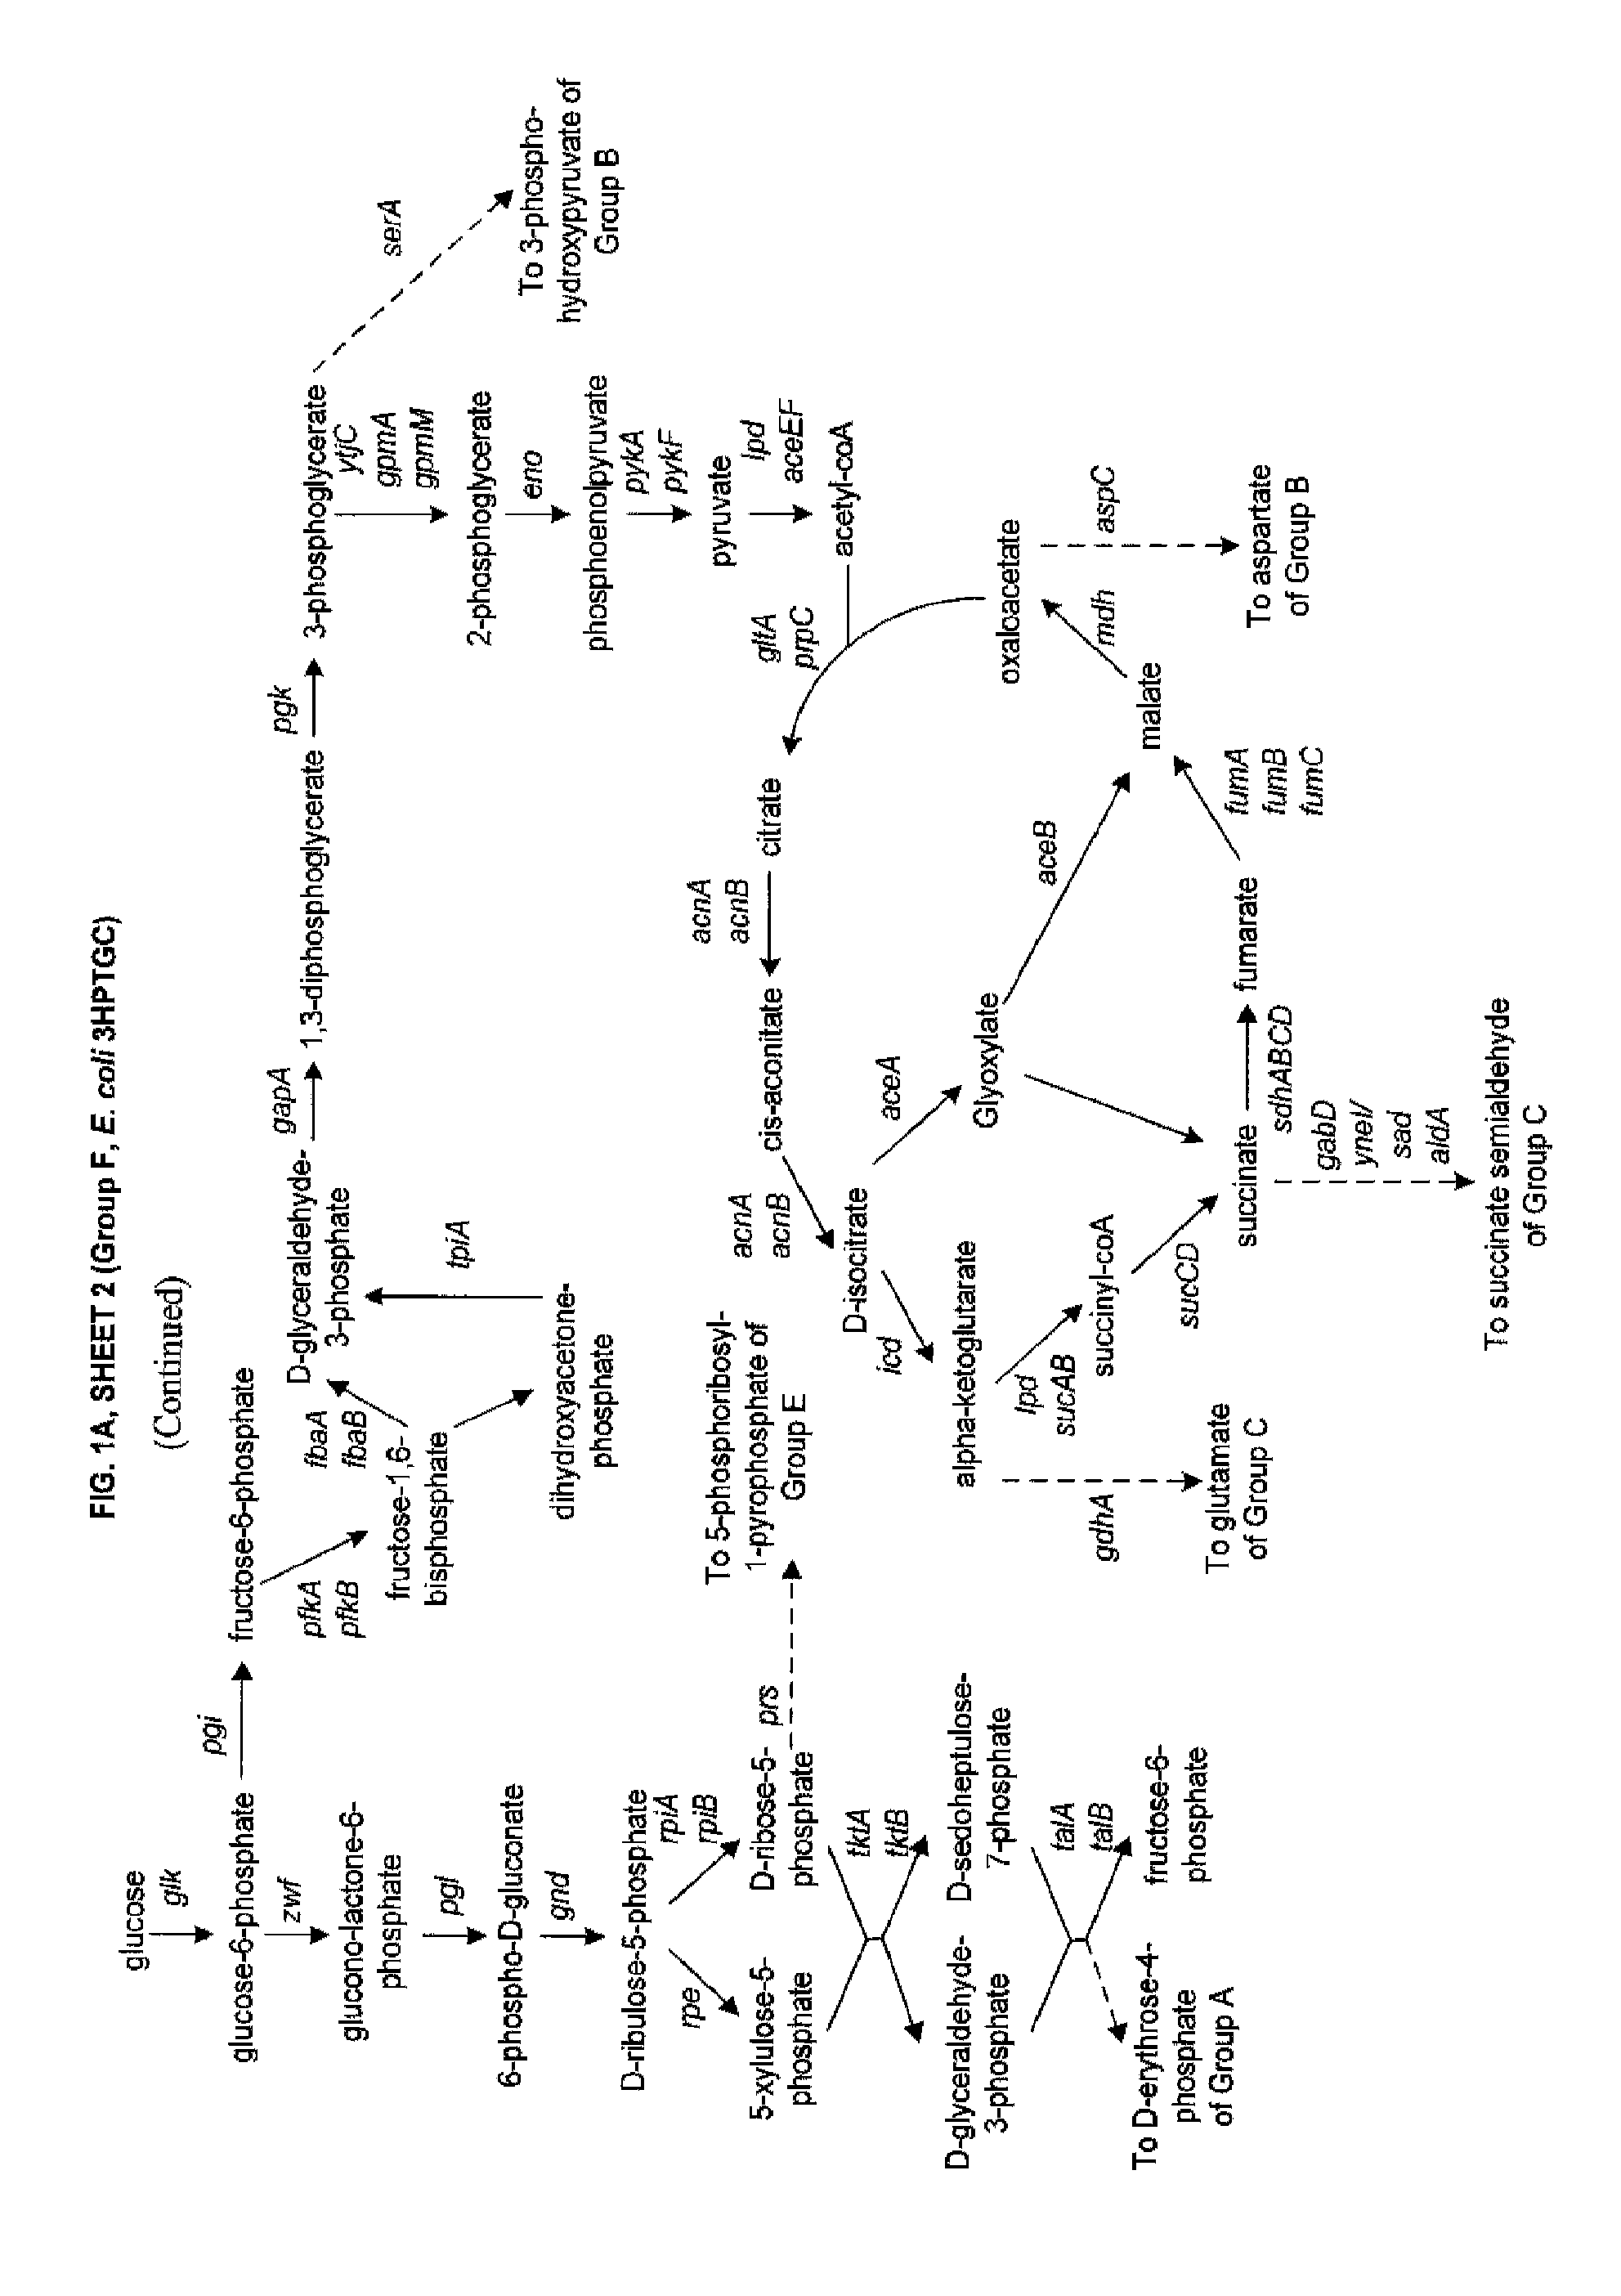 Methods, Systems and Compositions for Increased Microorganism Tolerance to and Production of 3-Hydroxypropionic Acid (3-HP)